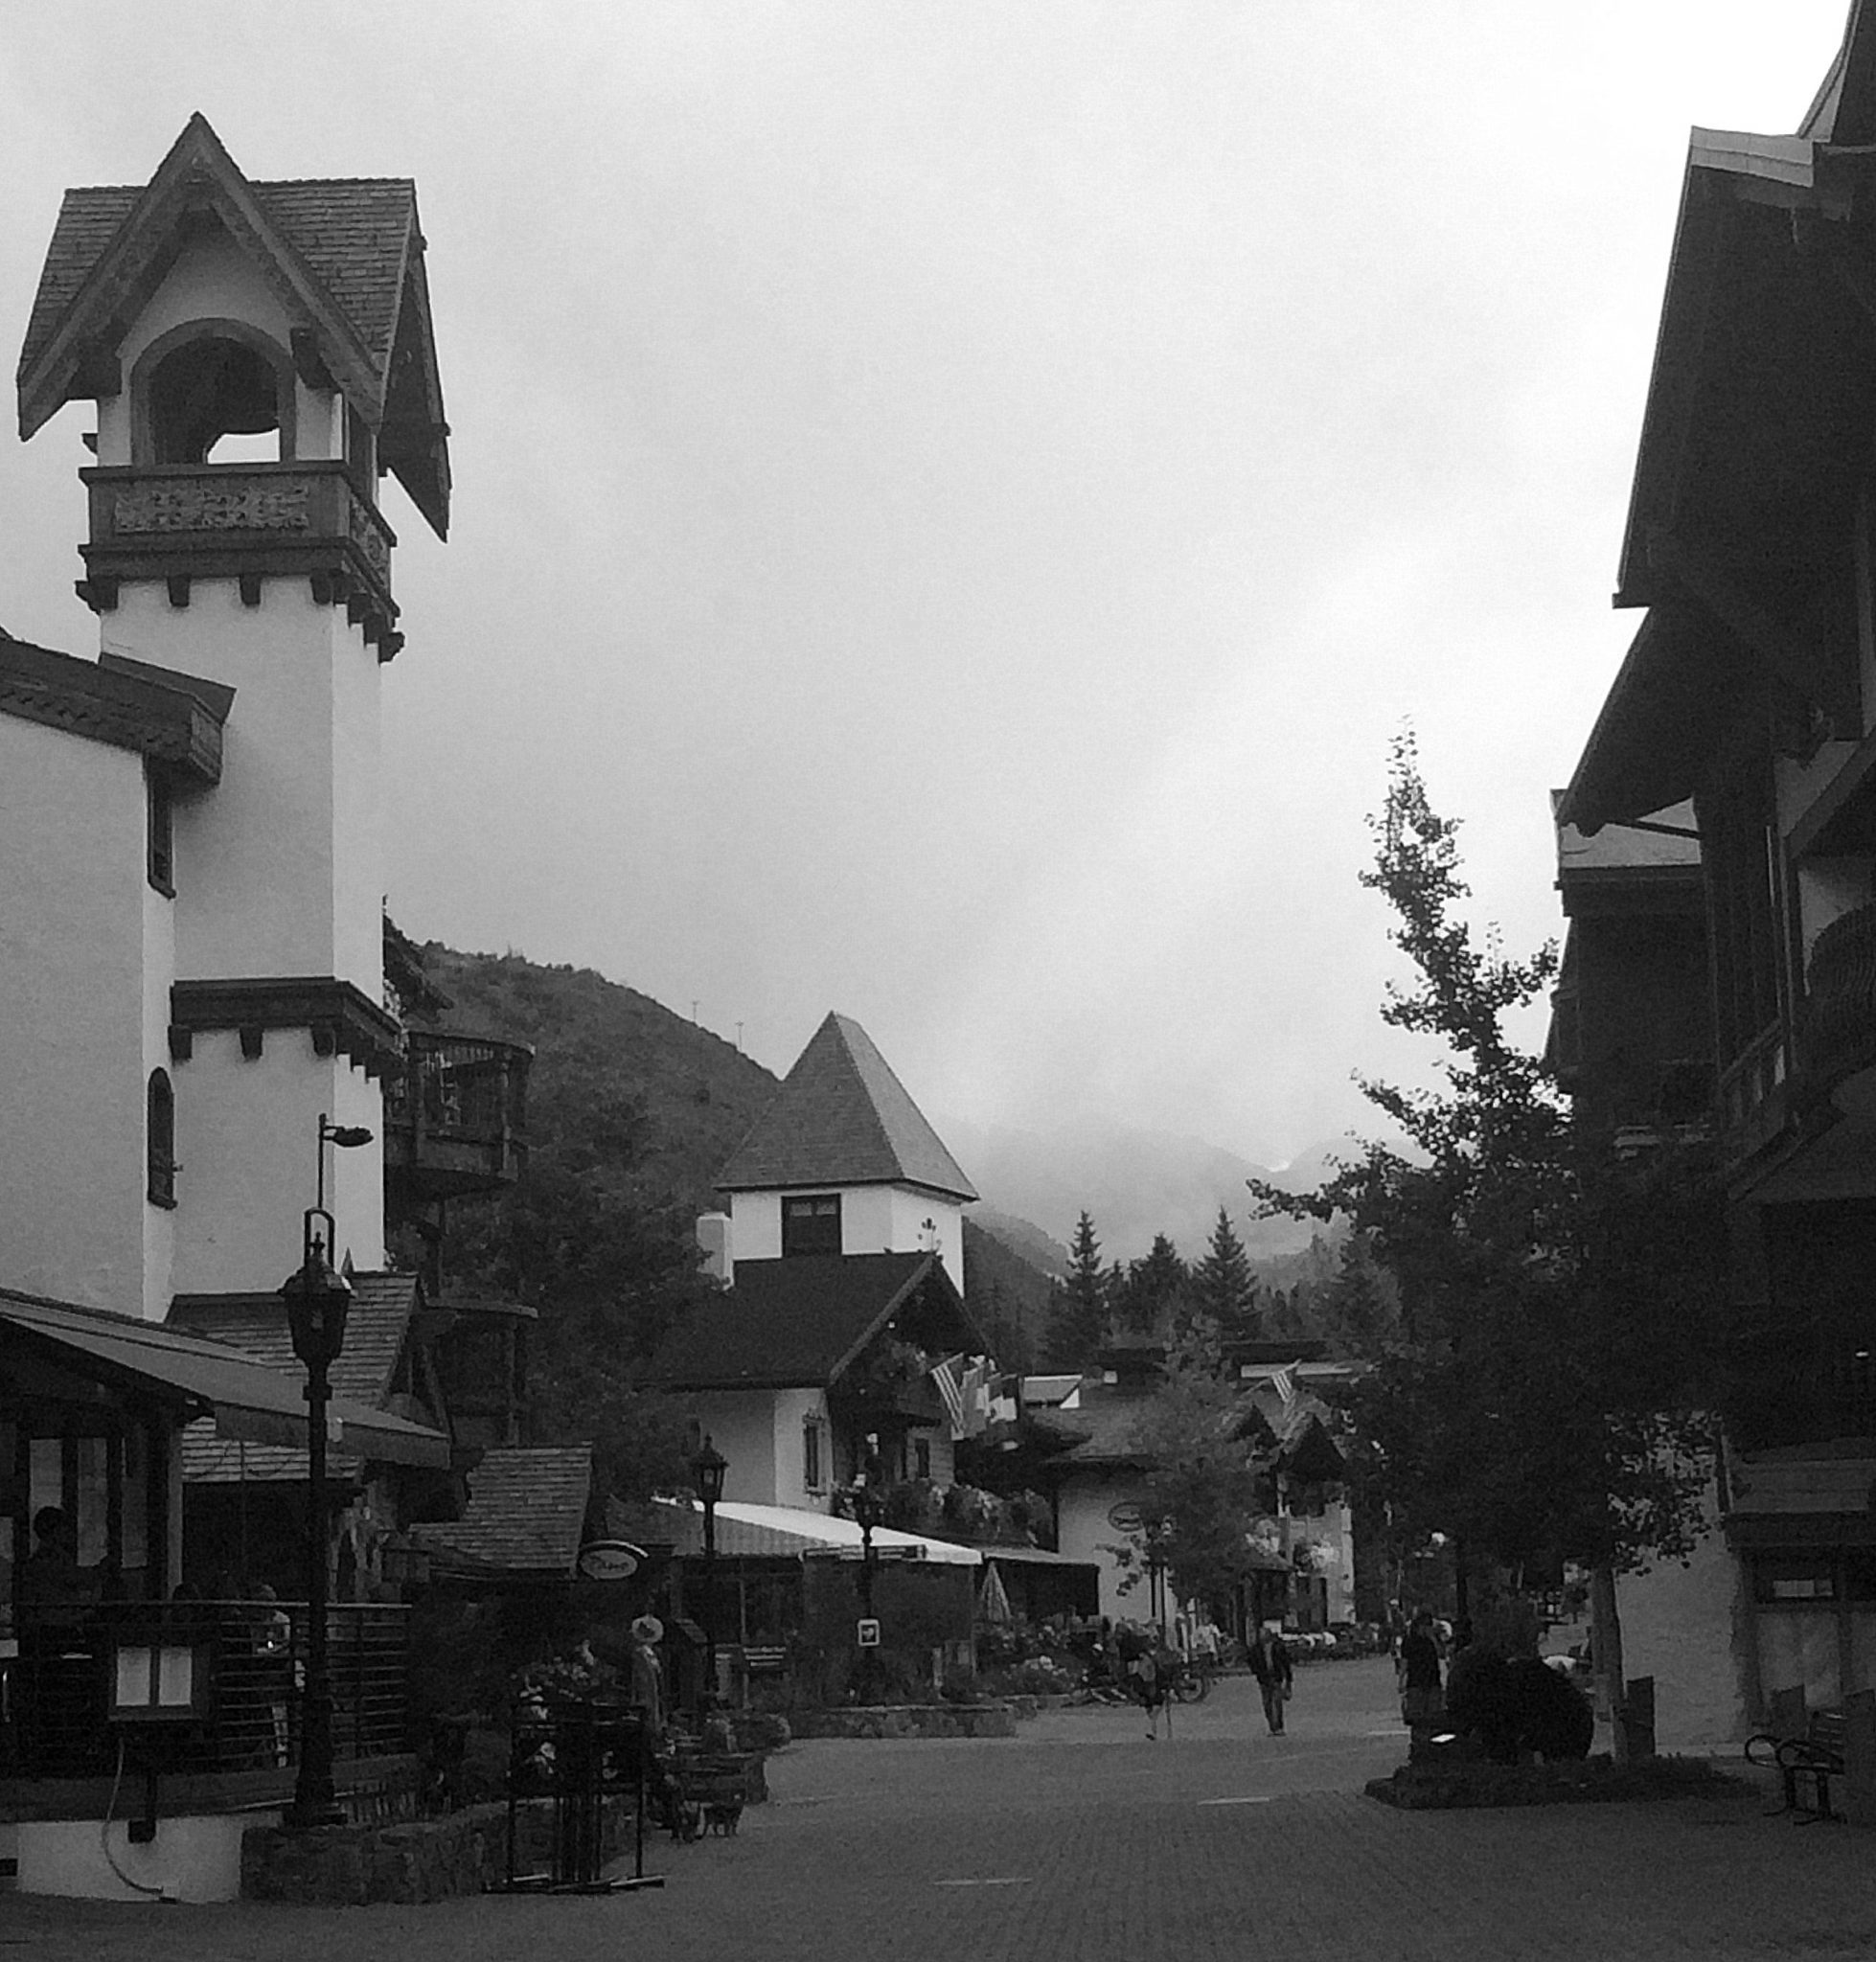 Vail Village; image courtesy of IRES